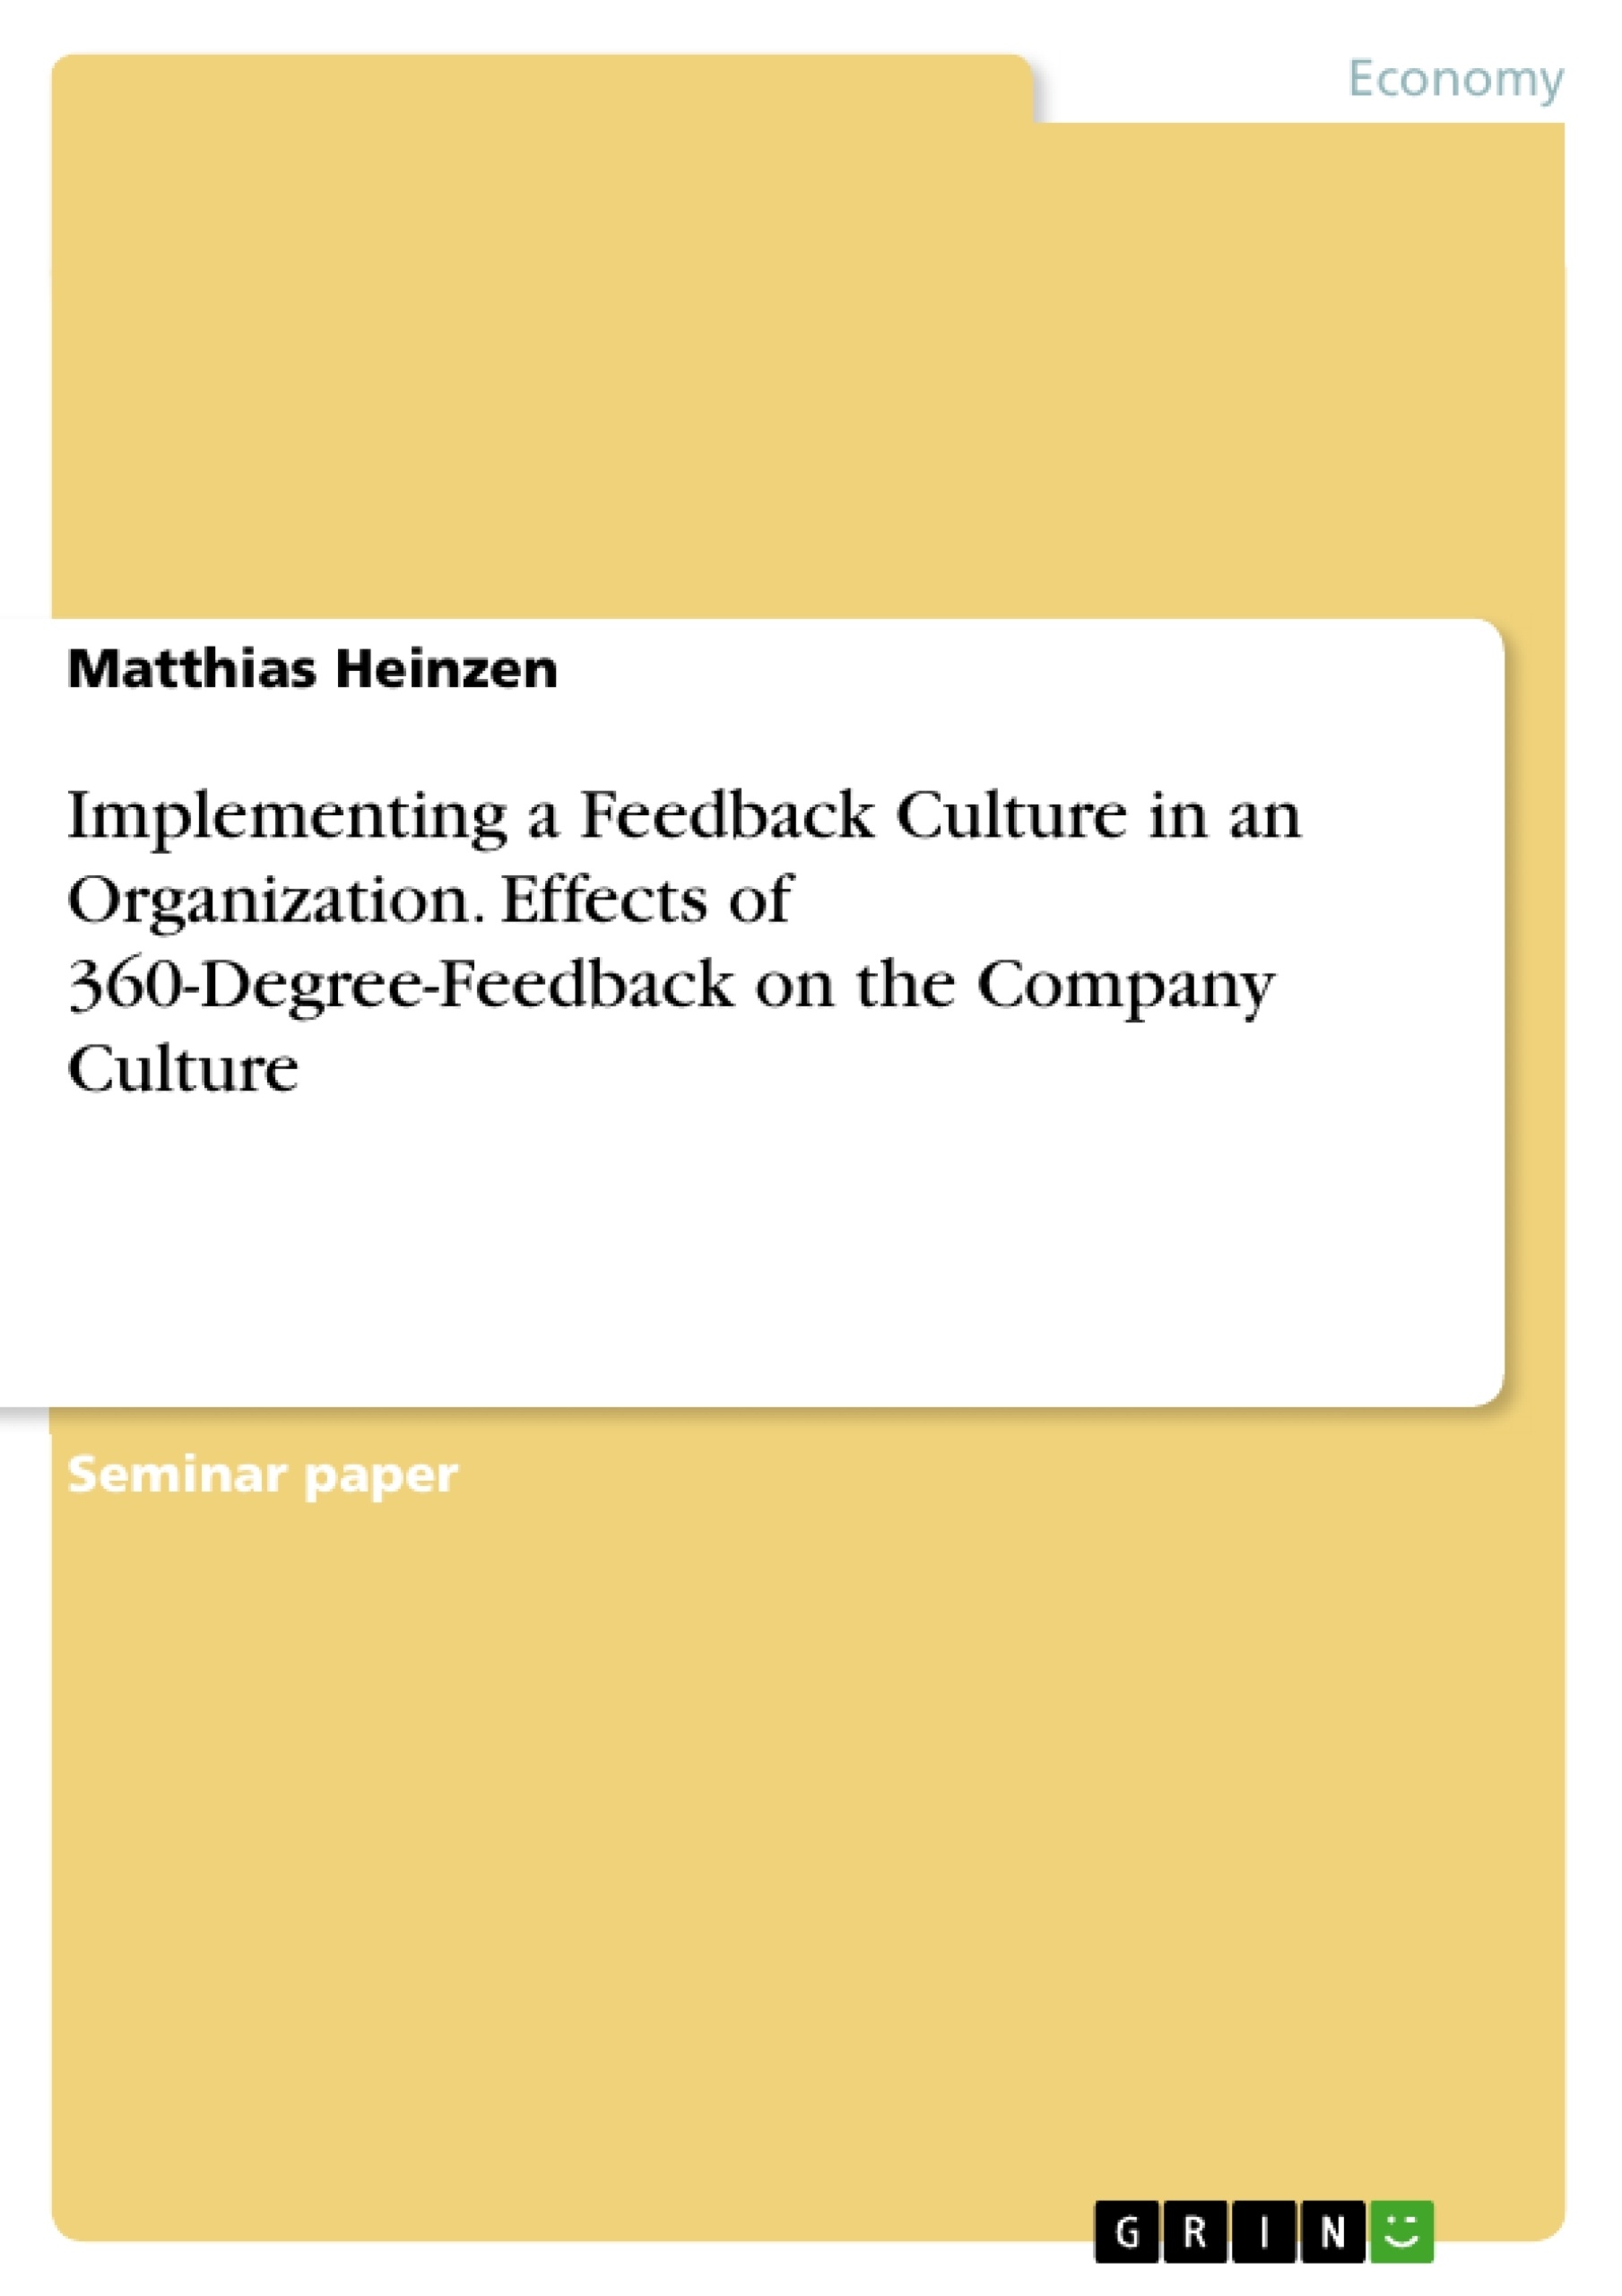 Title: Implementing a Feedback Culture in an Organization. Effects of 360-Degree-Feedback on the Company Culture